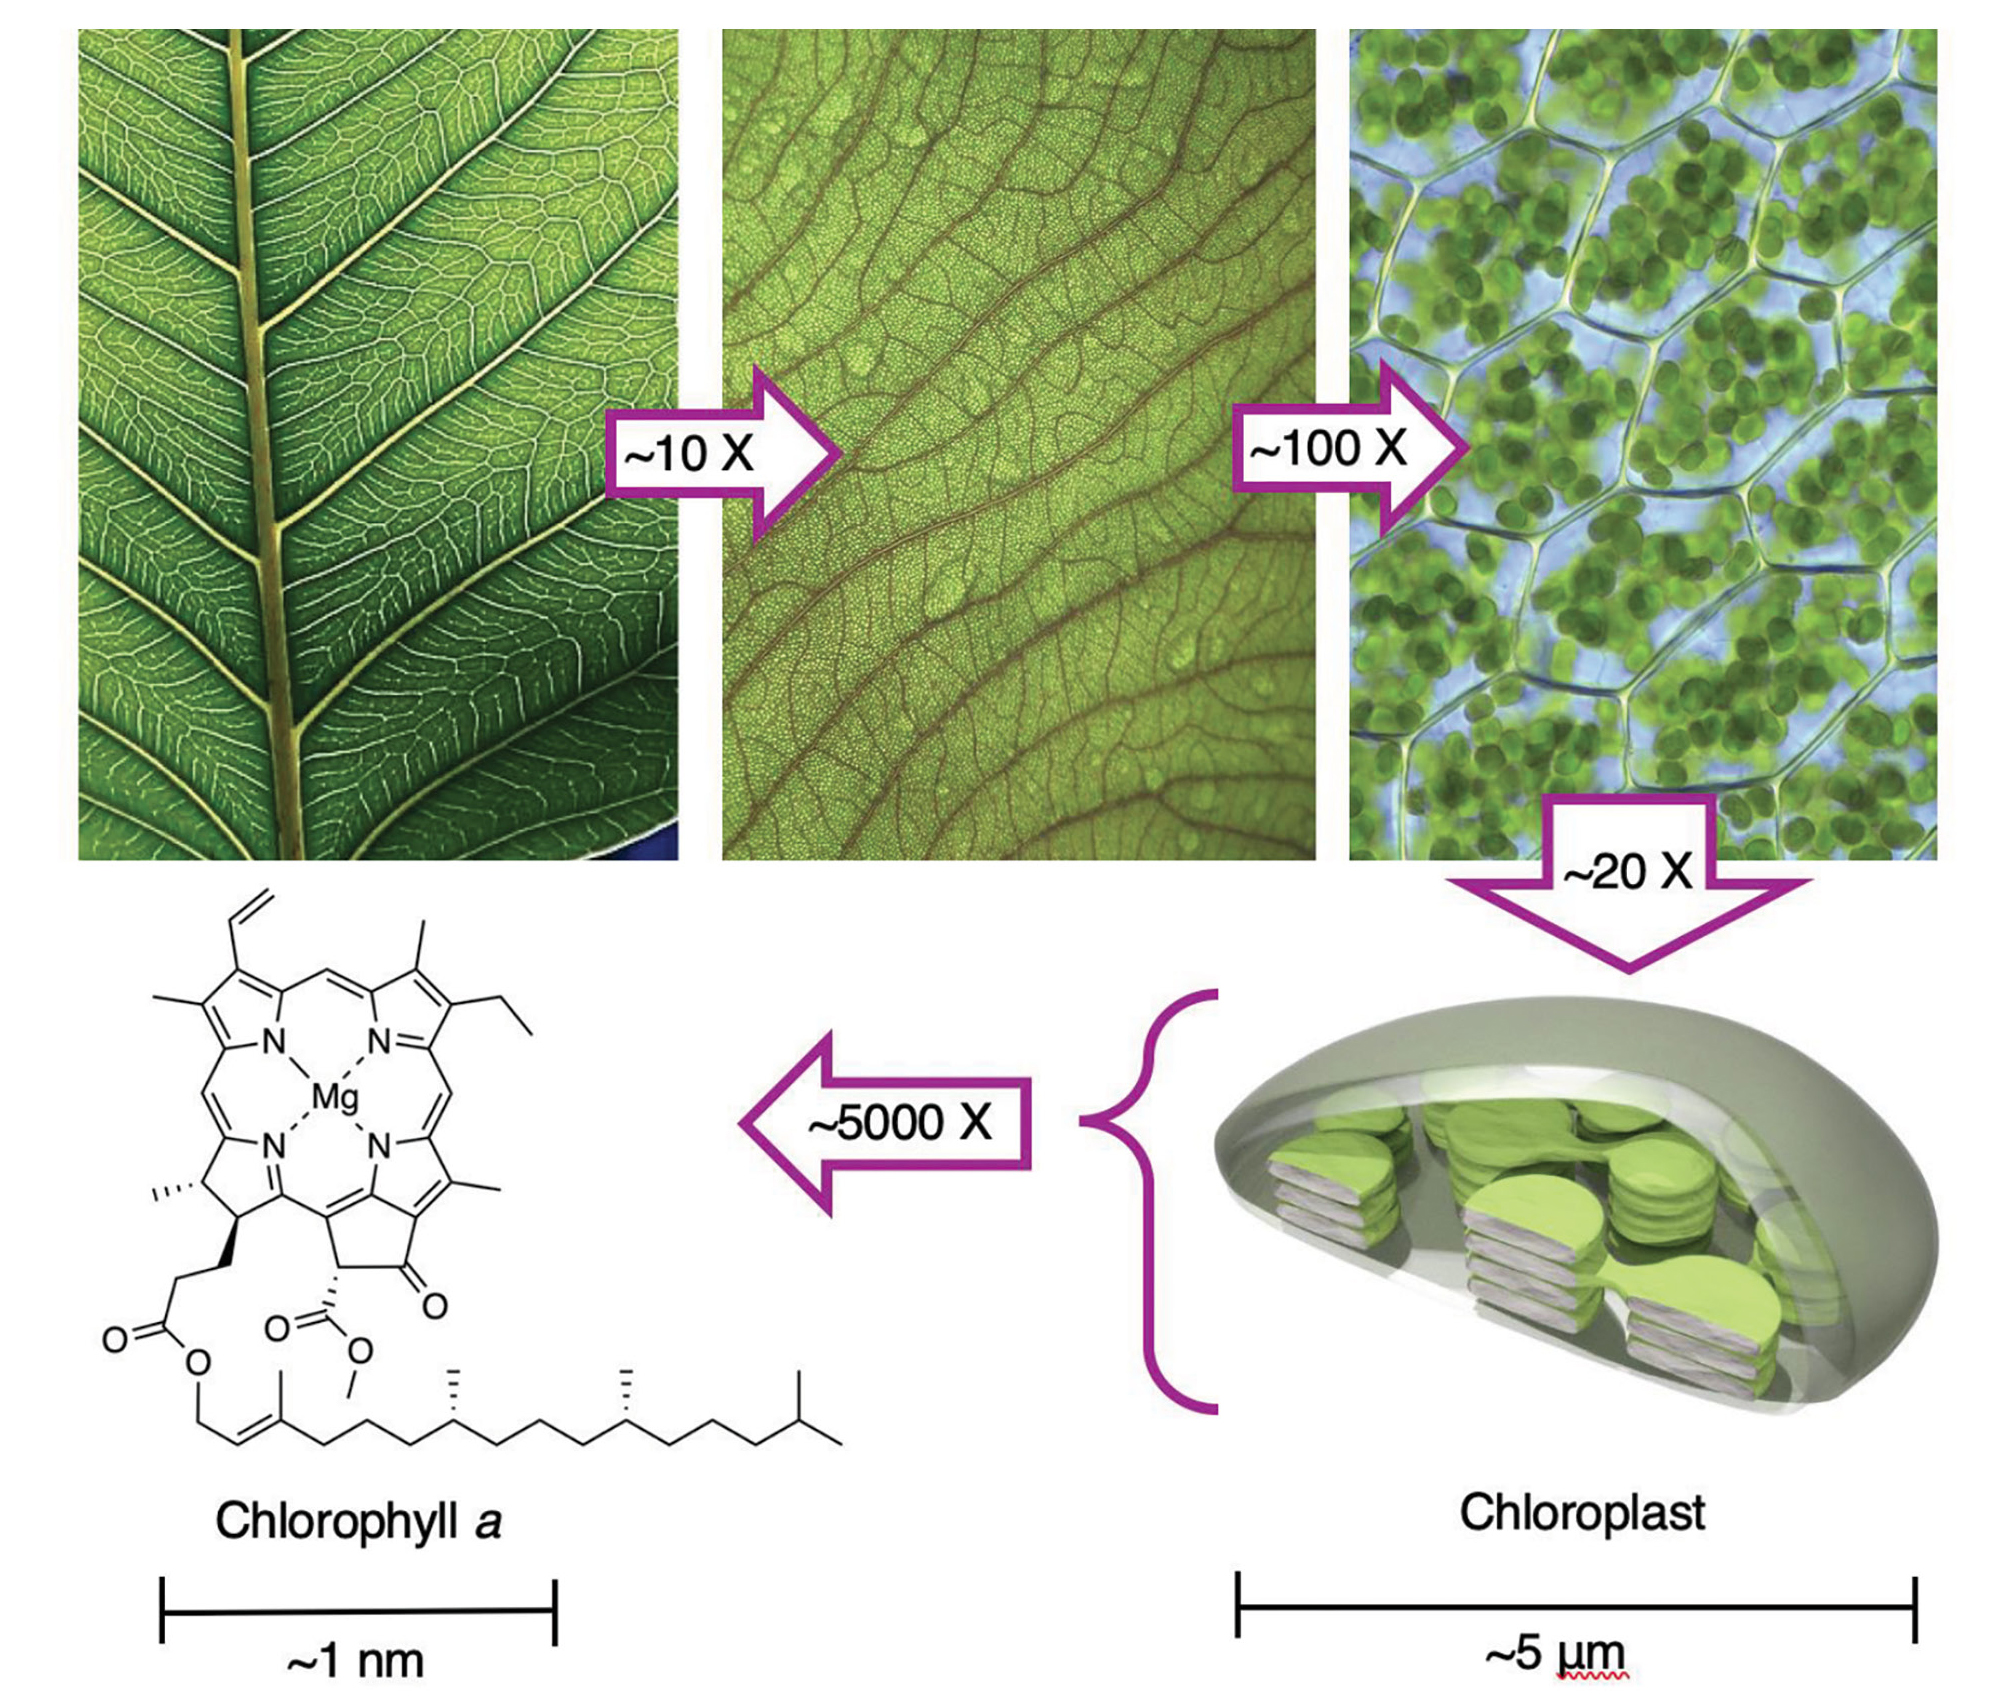 The “green” in leaves comes from chlorophyll molecules located within plant cells. Approximate magnification scales are given in the arrows (total ~108 X from 1 cm of the leaf to 1 nm, the size of the chlorophyll molecule). 